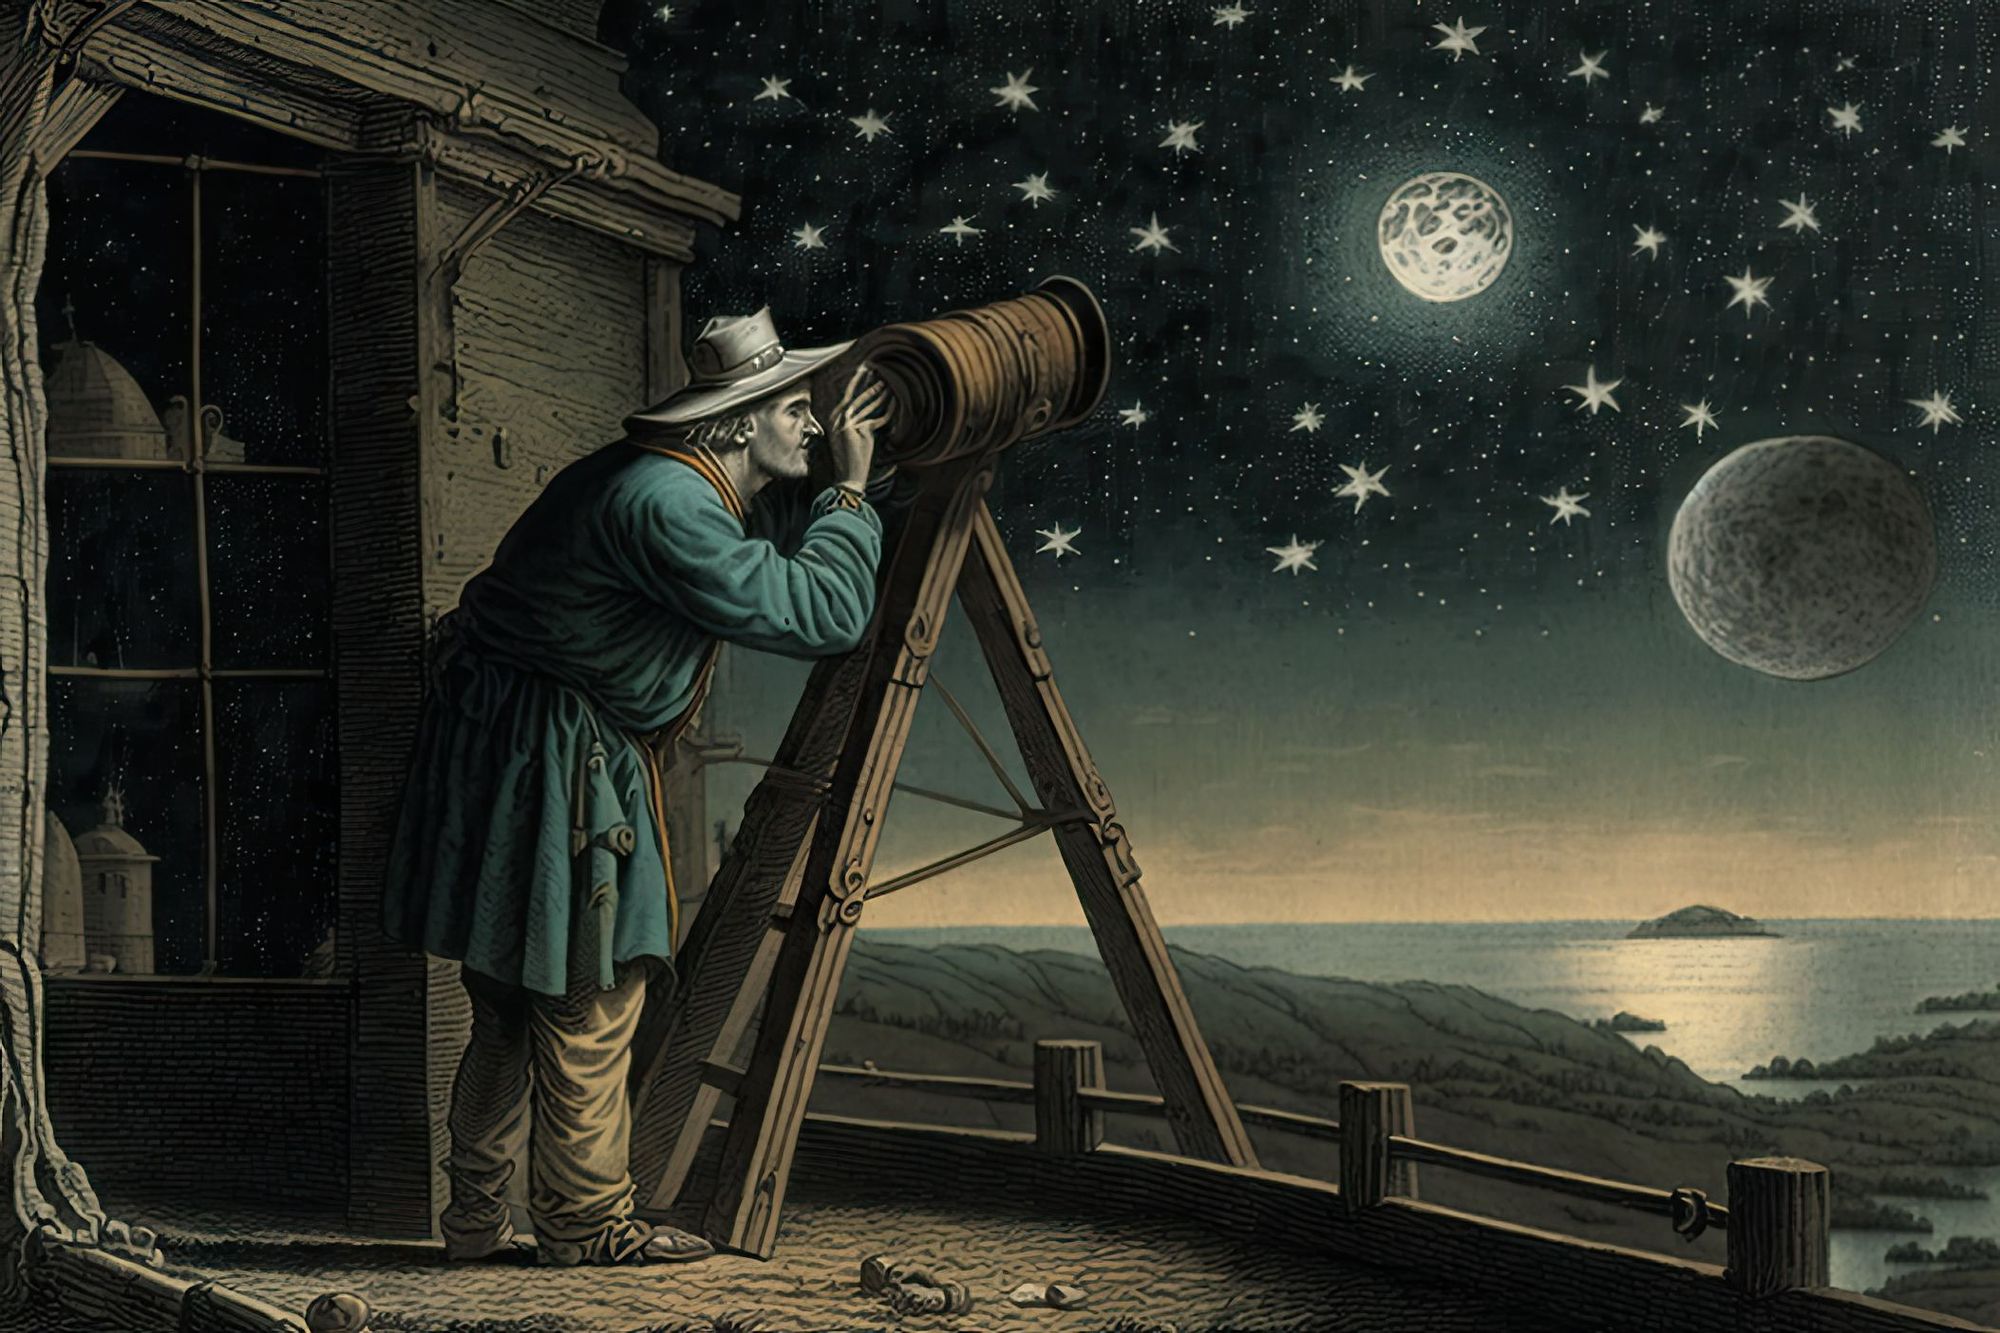 A man looking through a very old telescope under a night sky with stars, the moon and a large bright planet